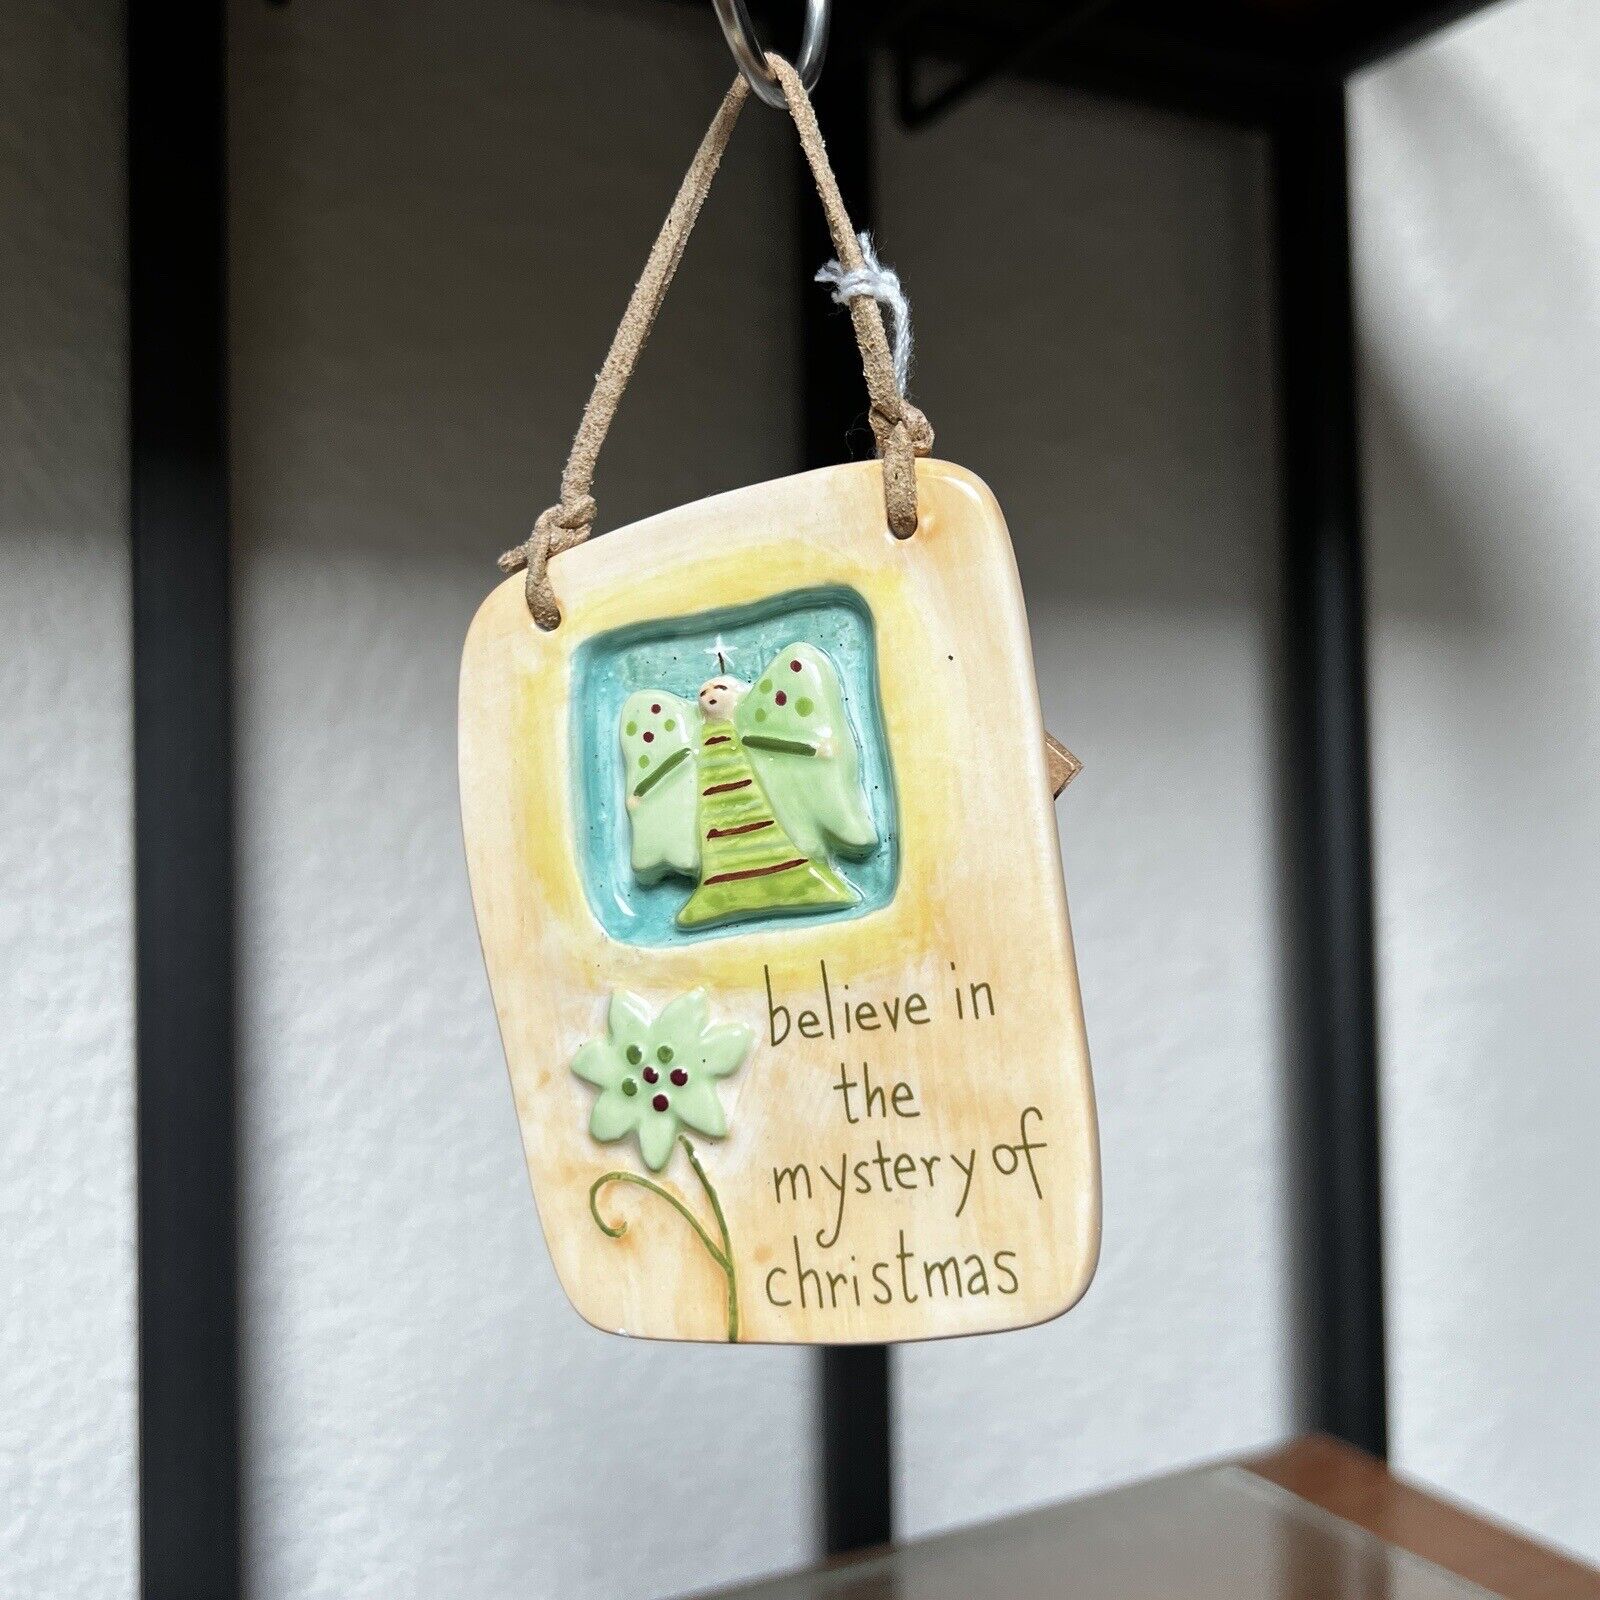 Natural Life Ceramic Plaque Angel Ornament “believe in the mystery of christmas”